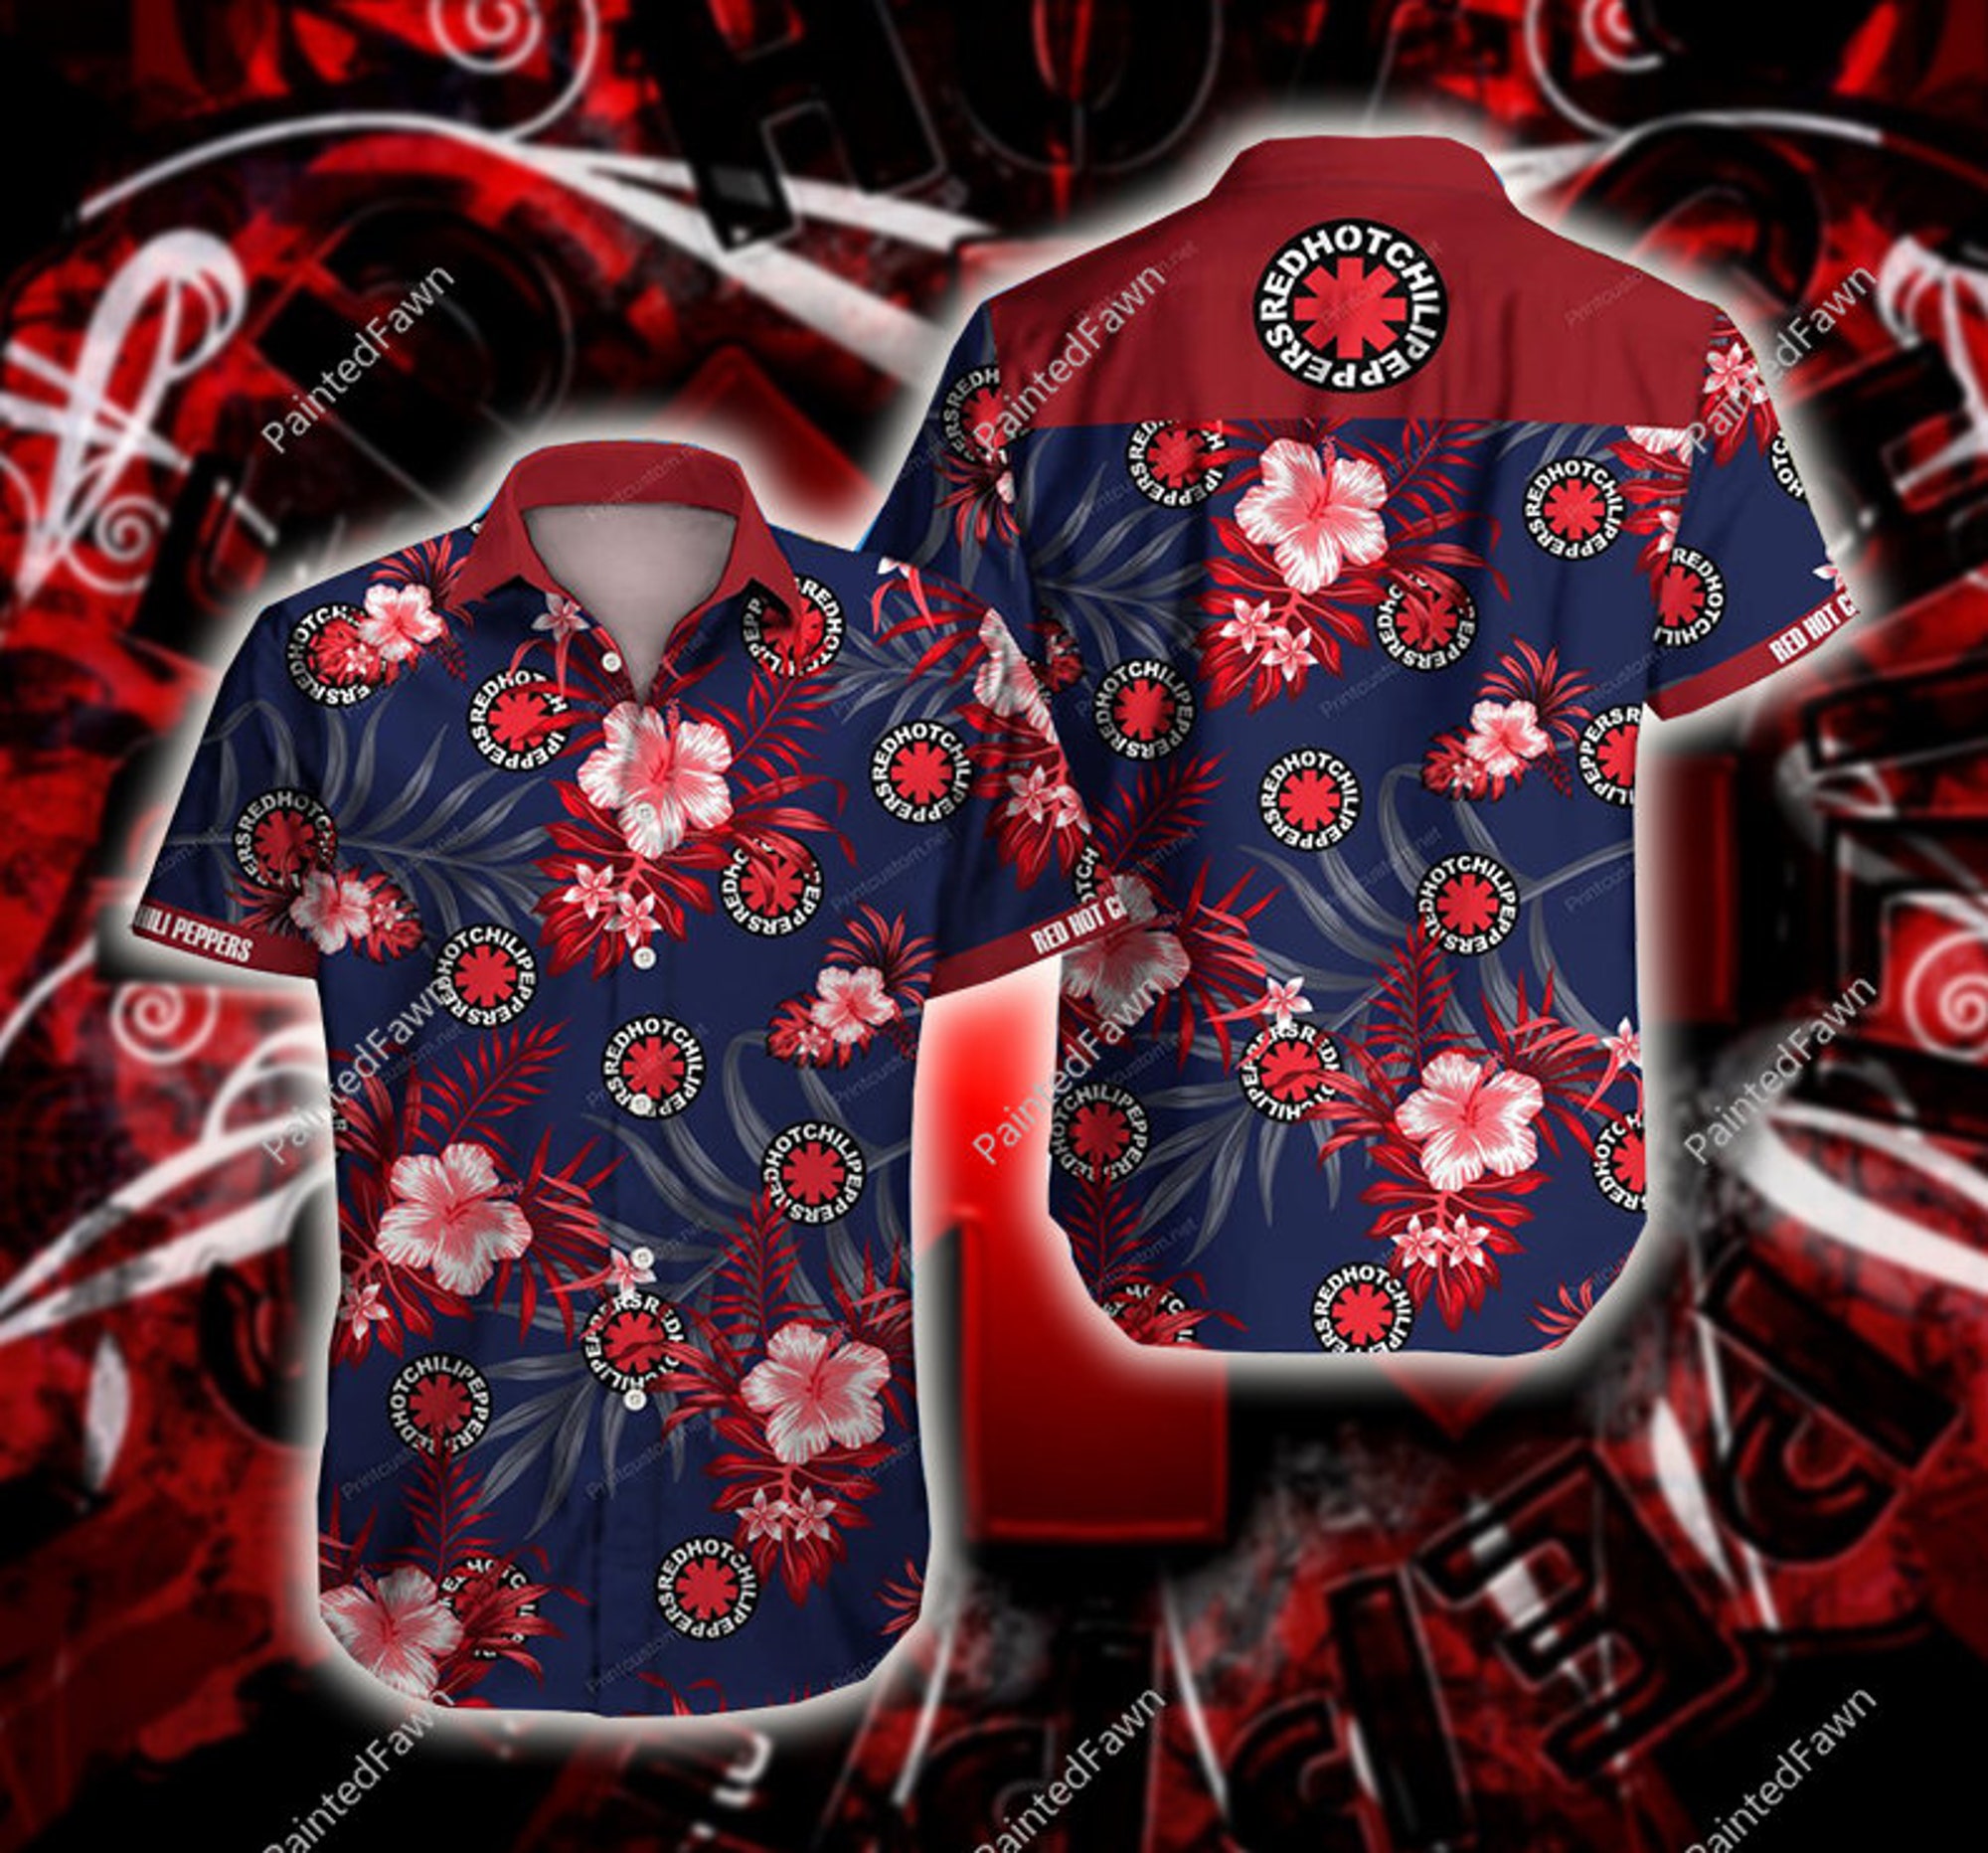 Discover Red Hot Chili Peppers Hawaiian Shirt